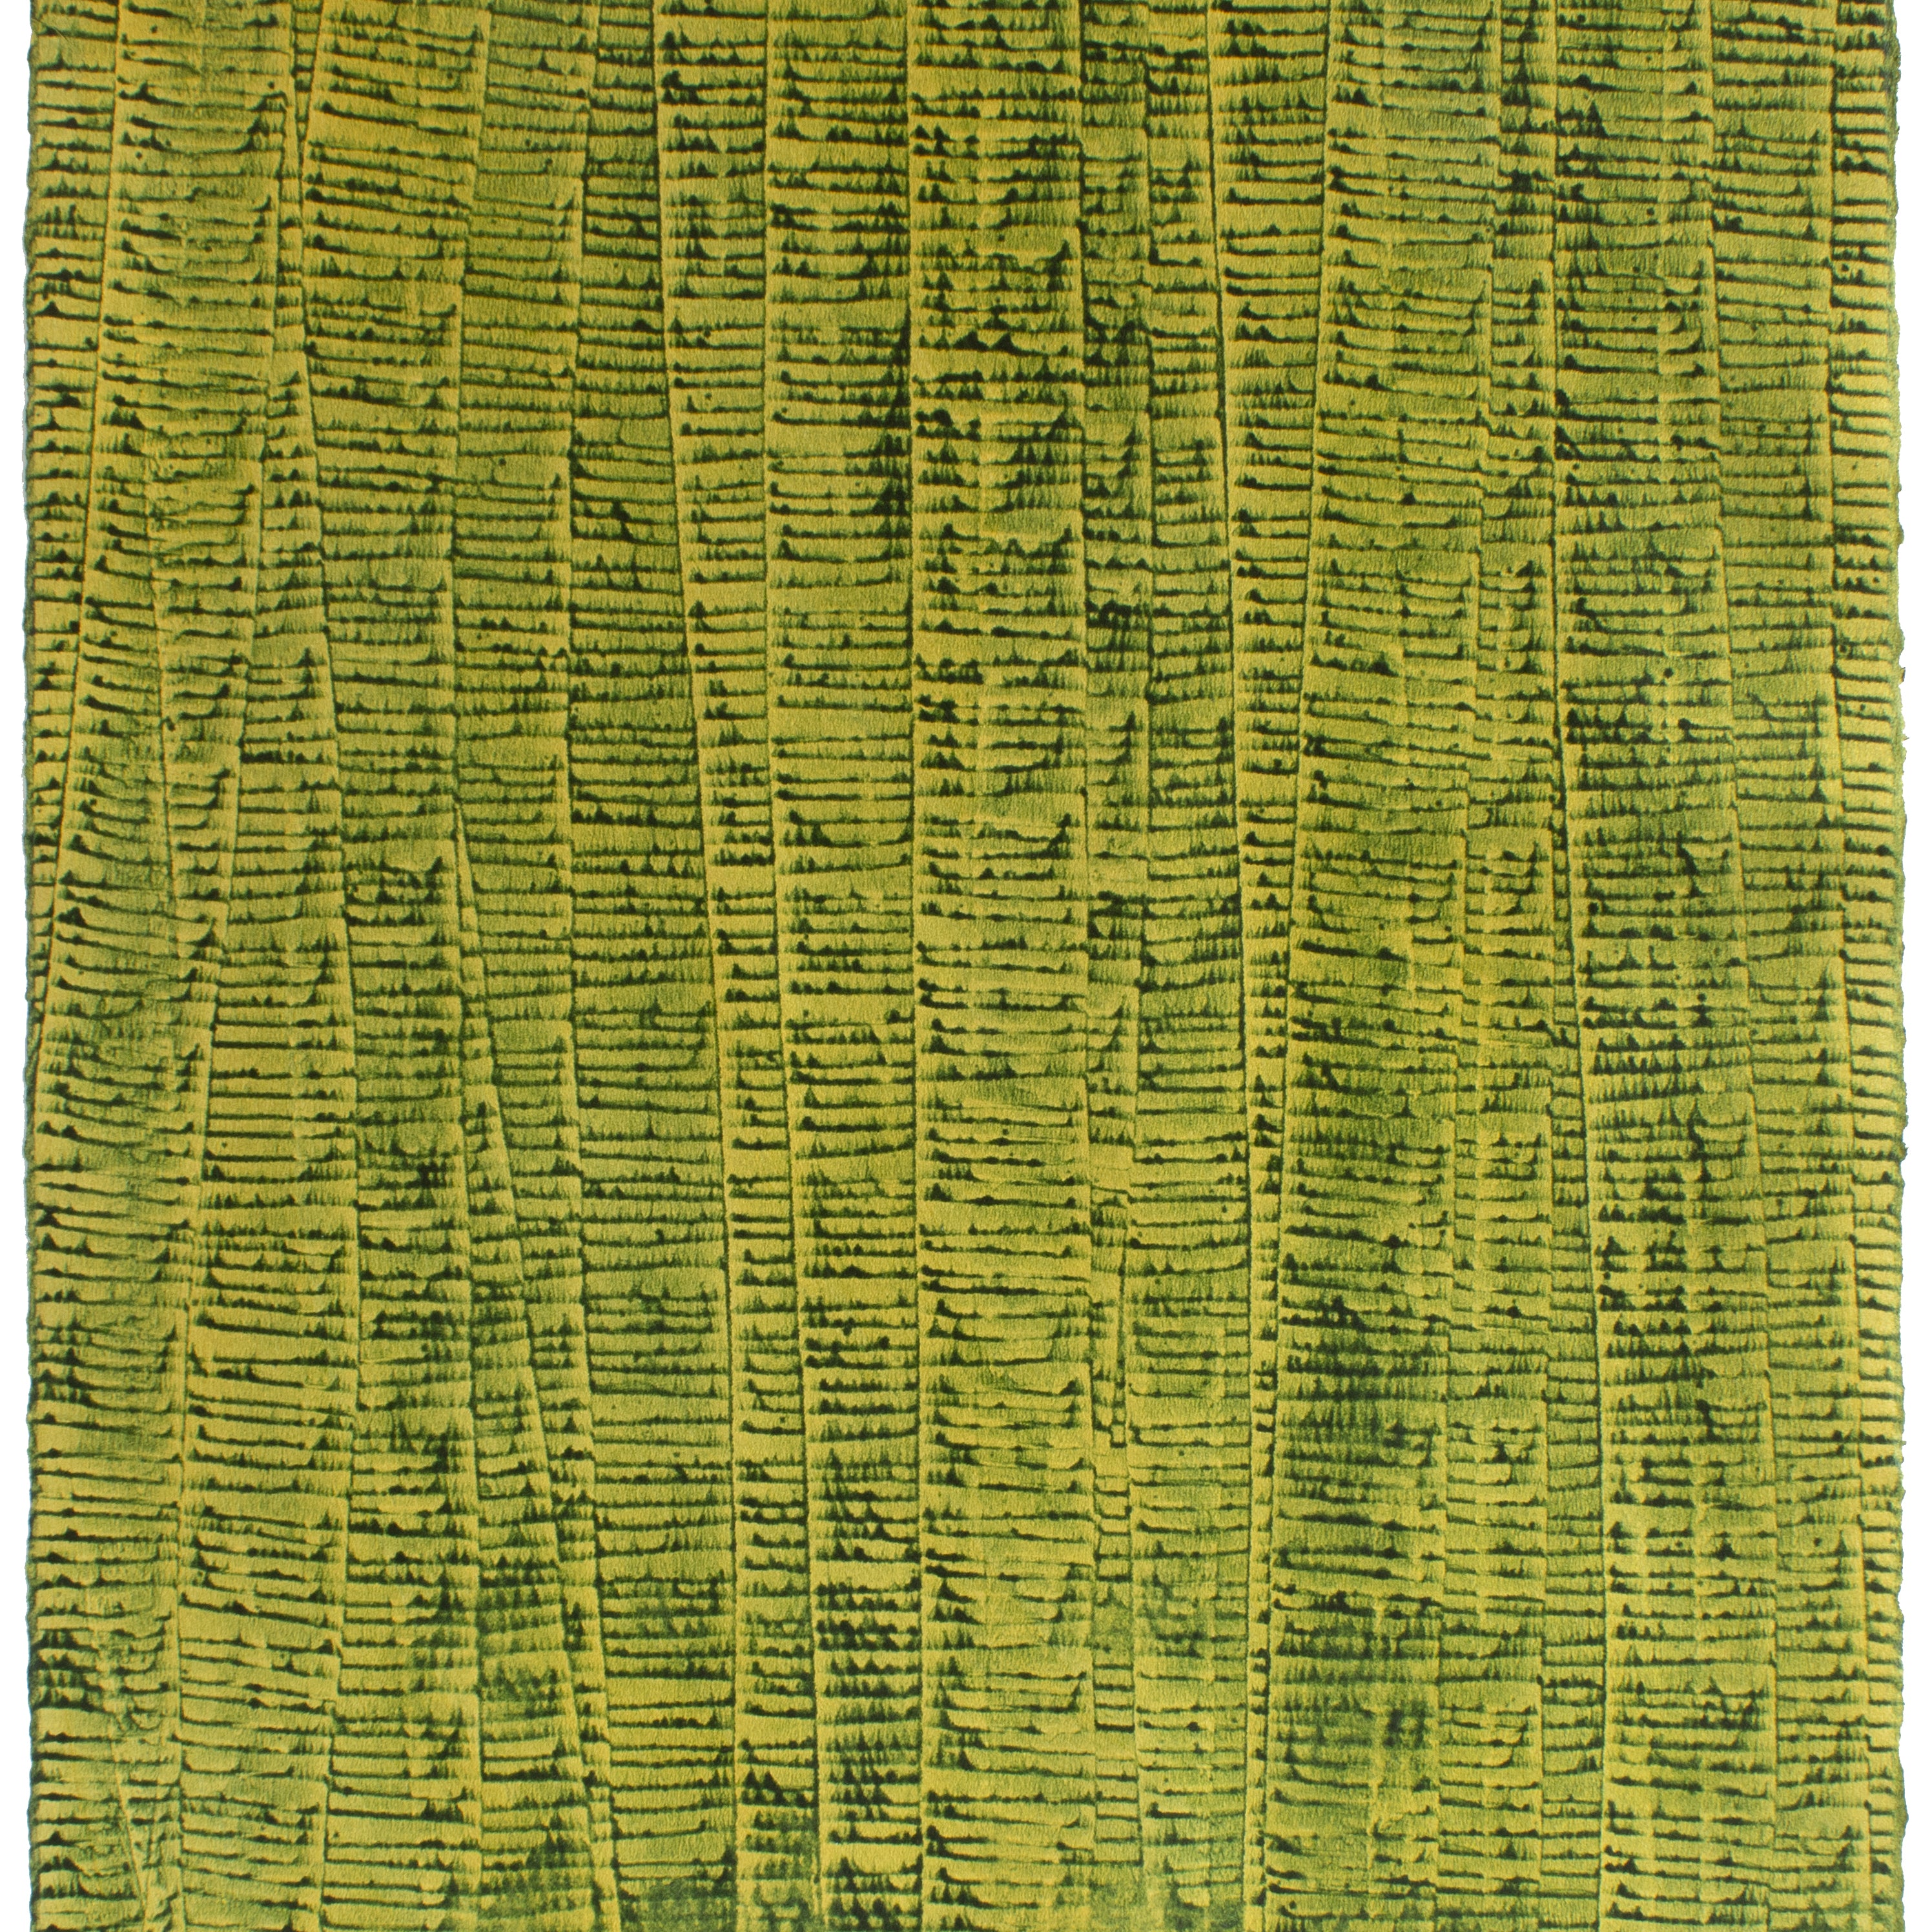 Sheet of hand-painted wallpaper with an undulating ribbon pattern in green on a gold field.